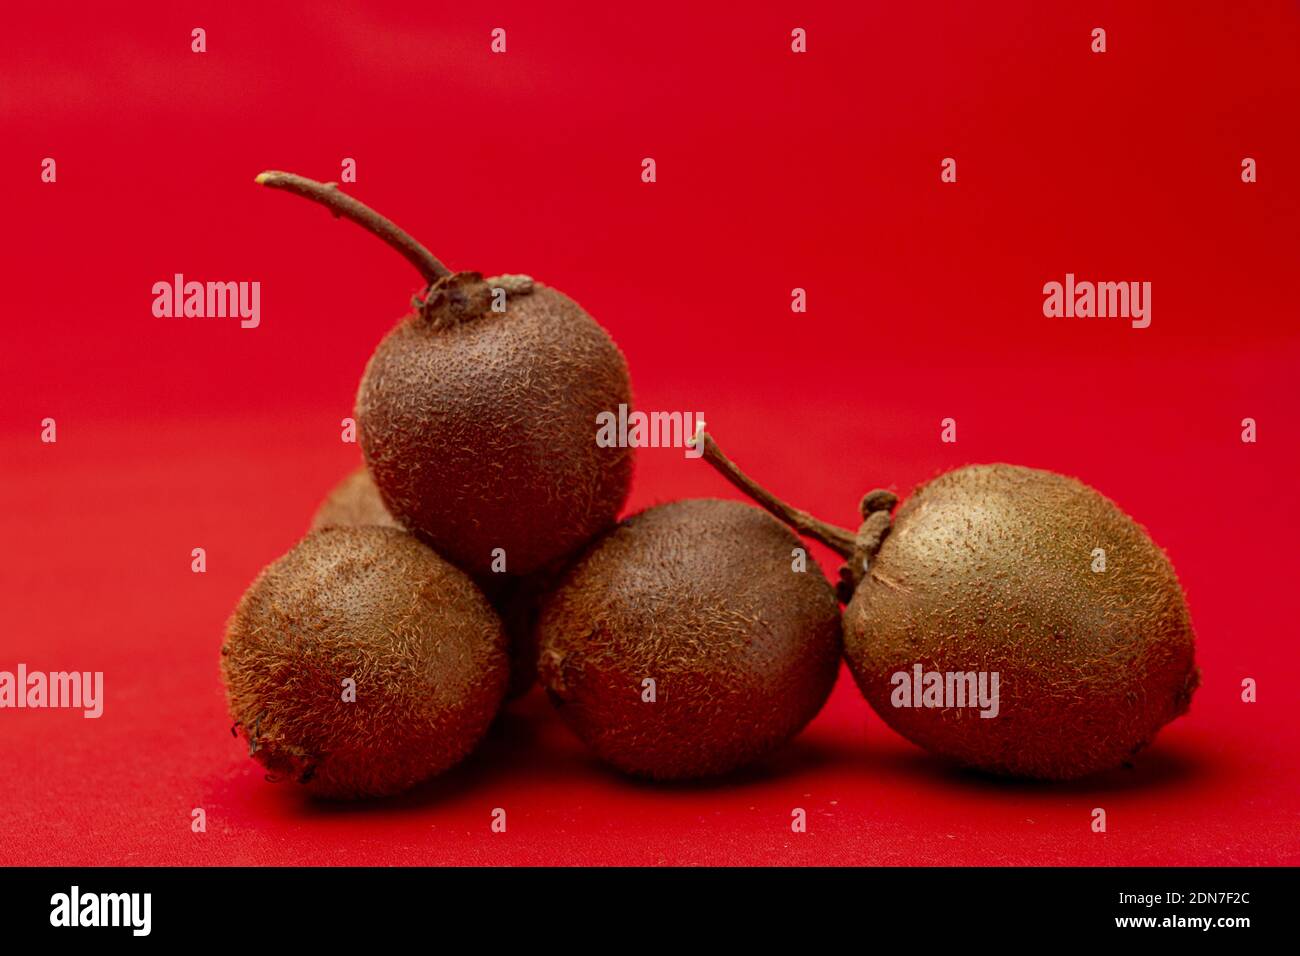 Group of tiny kiwifruit of Actinidia Deliciosa Setosa species against an intense even vibrant red background Stock Photo